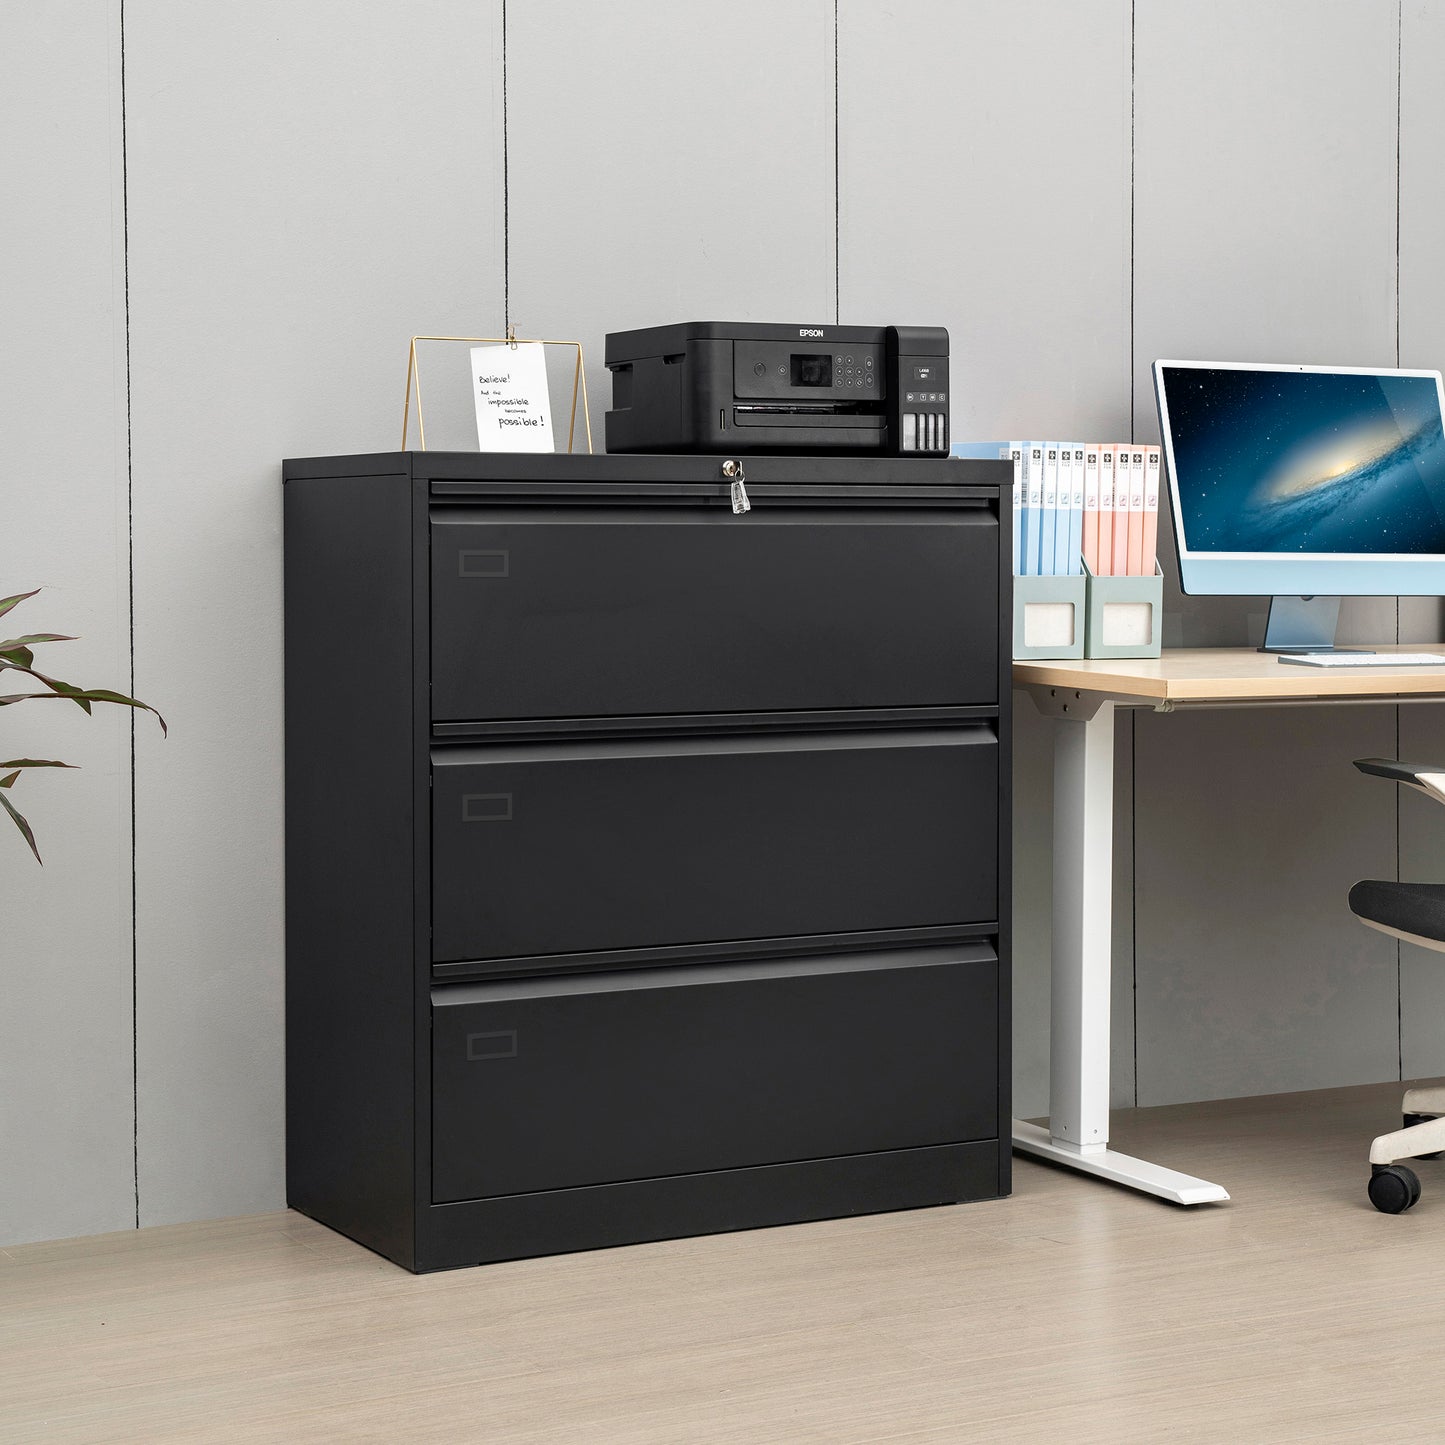 3 Drawer Black Steel Lateral File Cabinet with Large Storage Space and Anti-Tilt Design